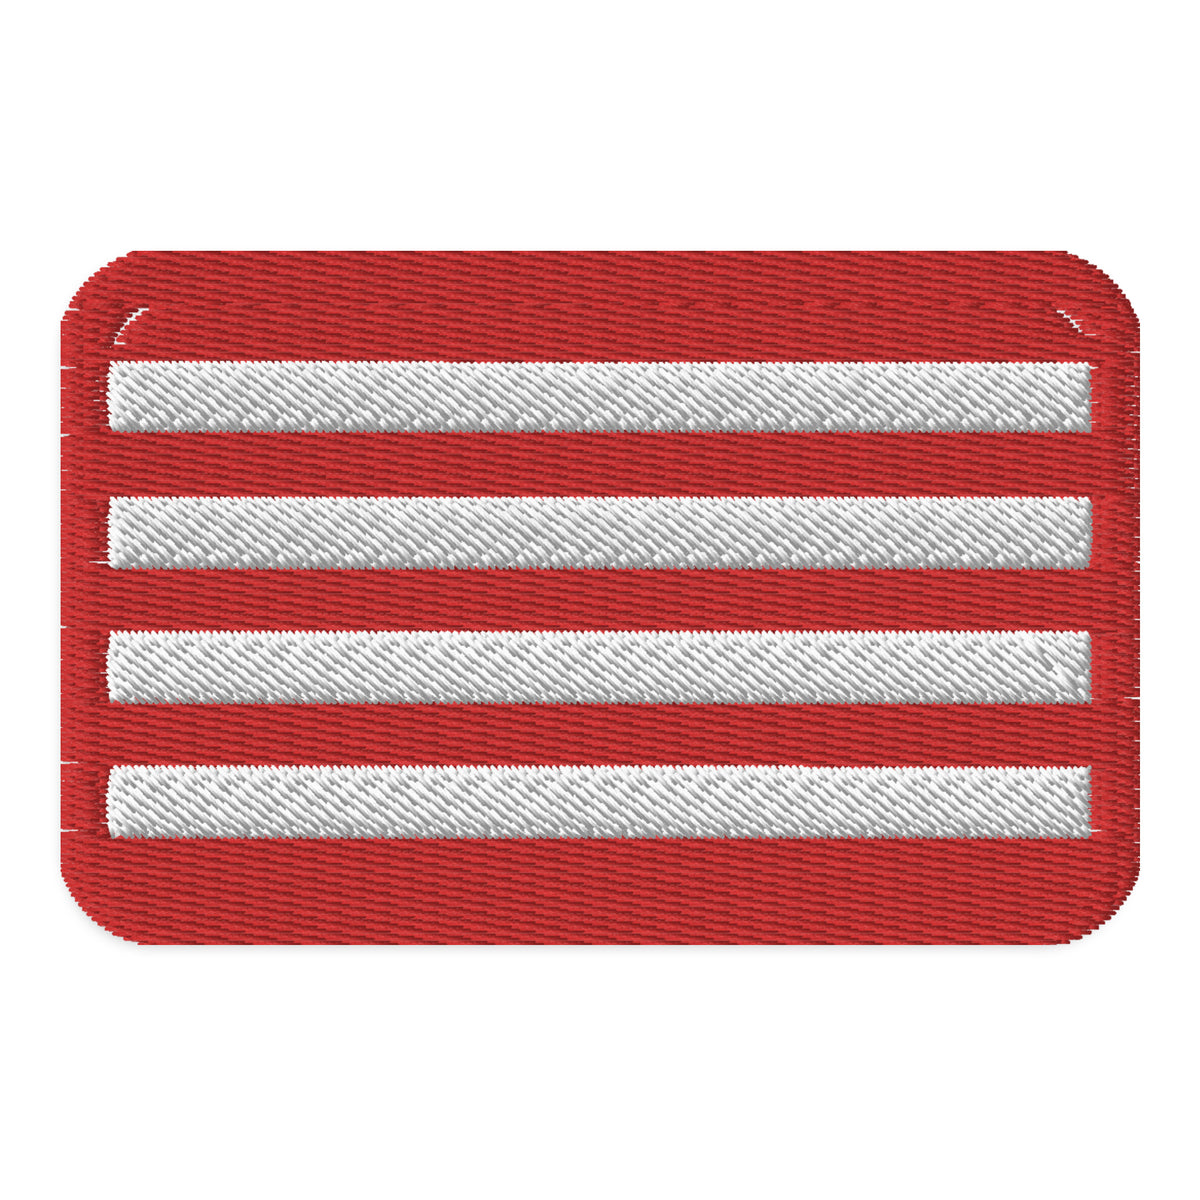 Sons of Liberty Rebel Stripes Flag Patch